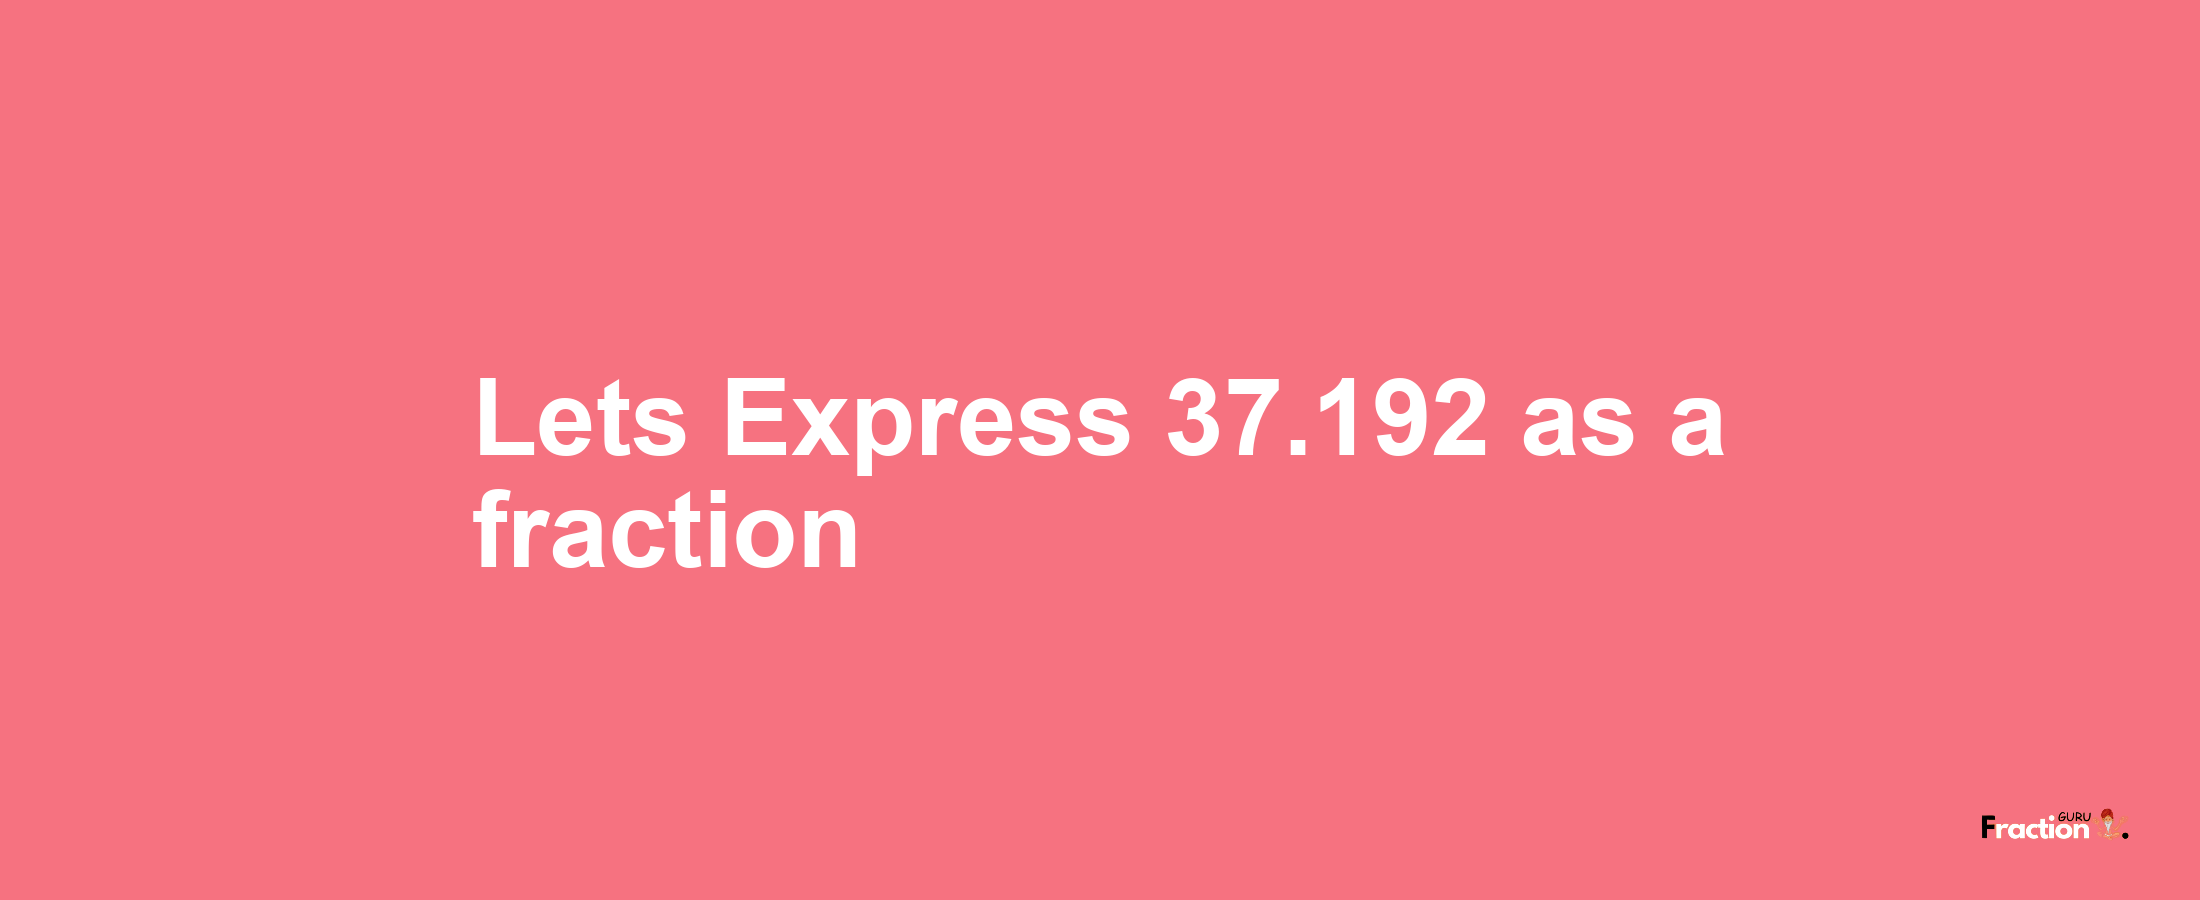 Lets Express 37.192 as afraction